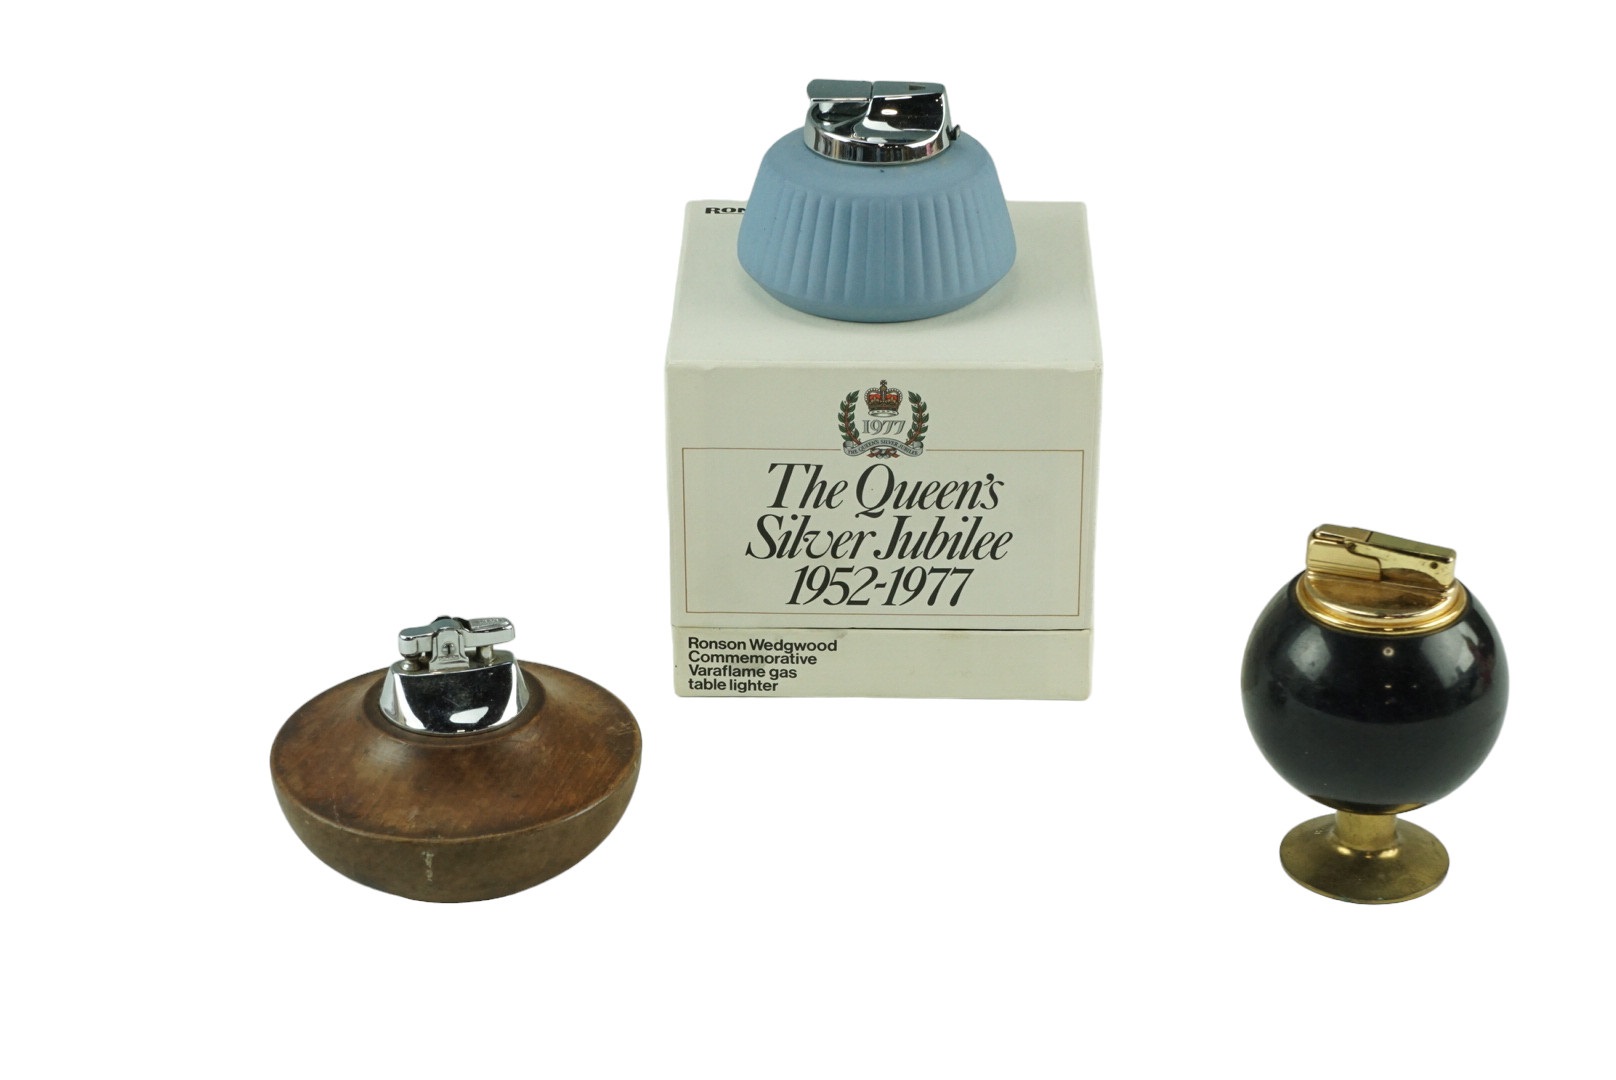 Three vintage tabletop cigarette lighters comprising a boxed Ronson Wedgwood commemorative